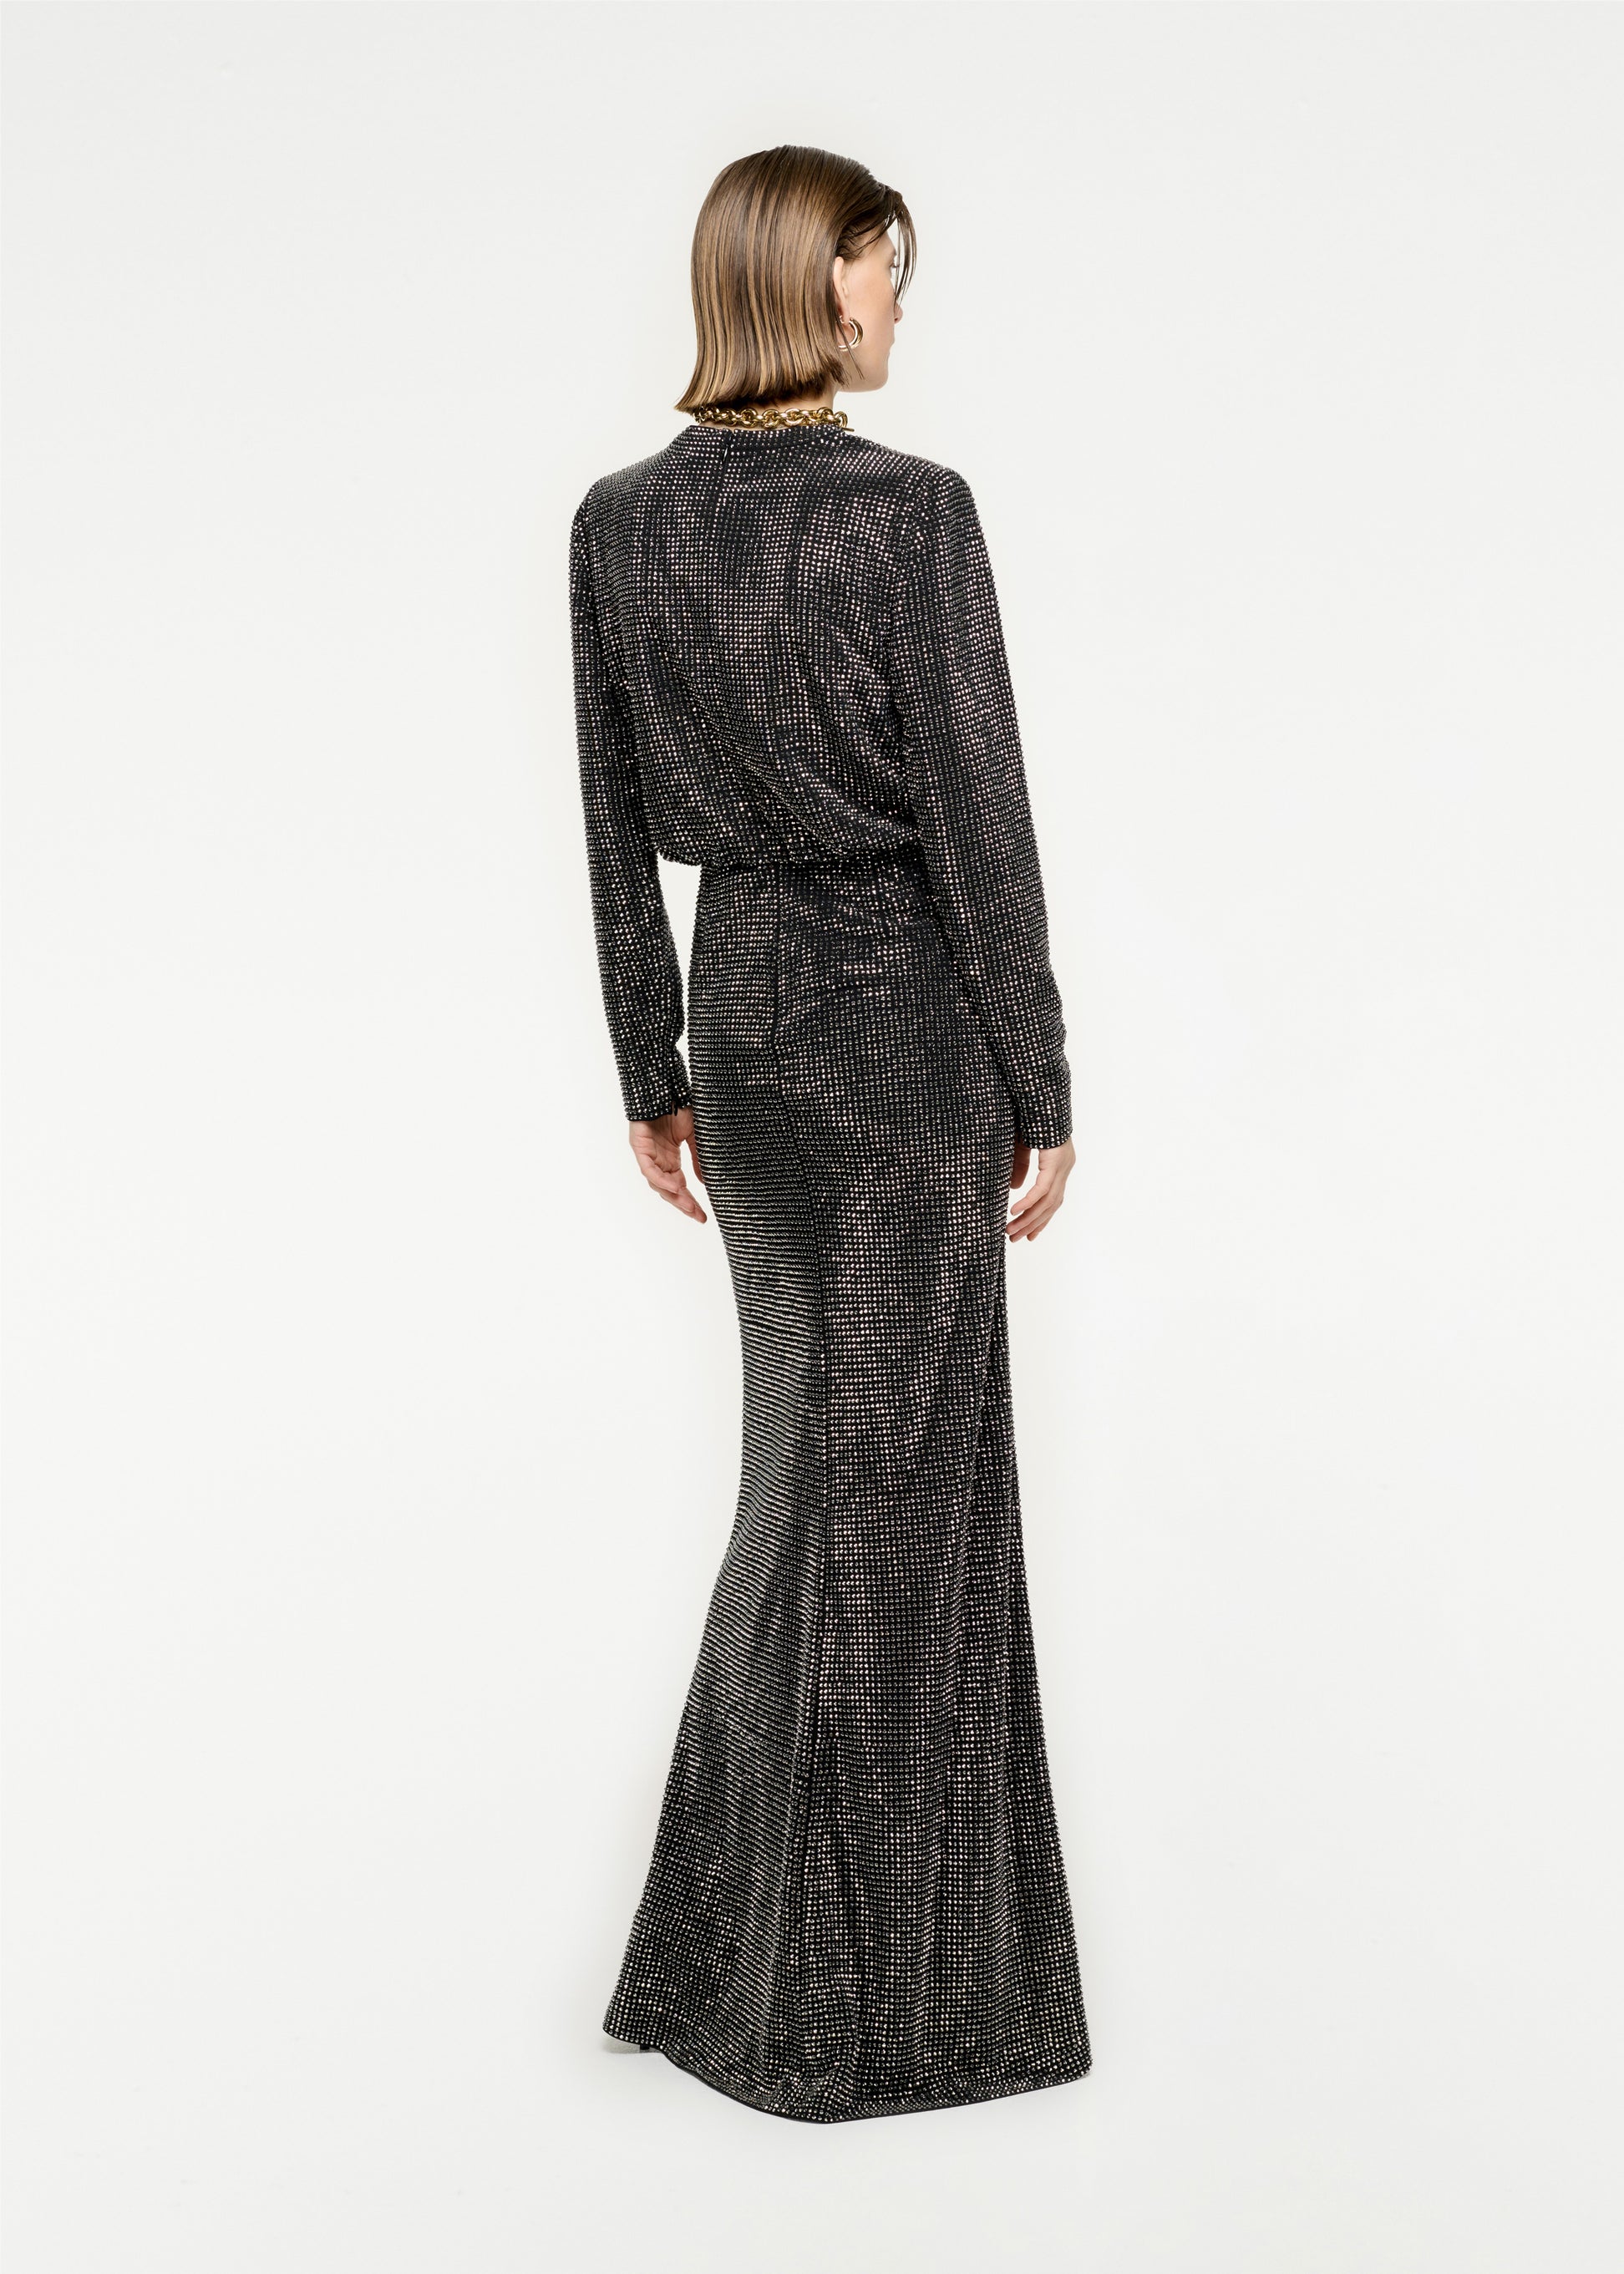 The back of a woman wearing the Long Sleeve Diamante Maxi Dress in Black